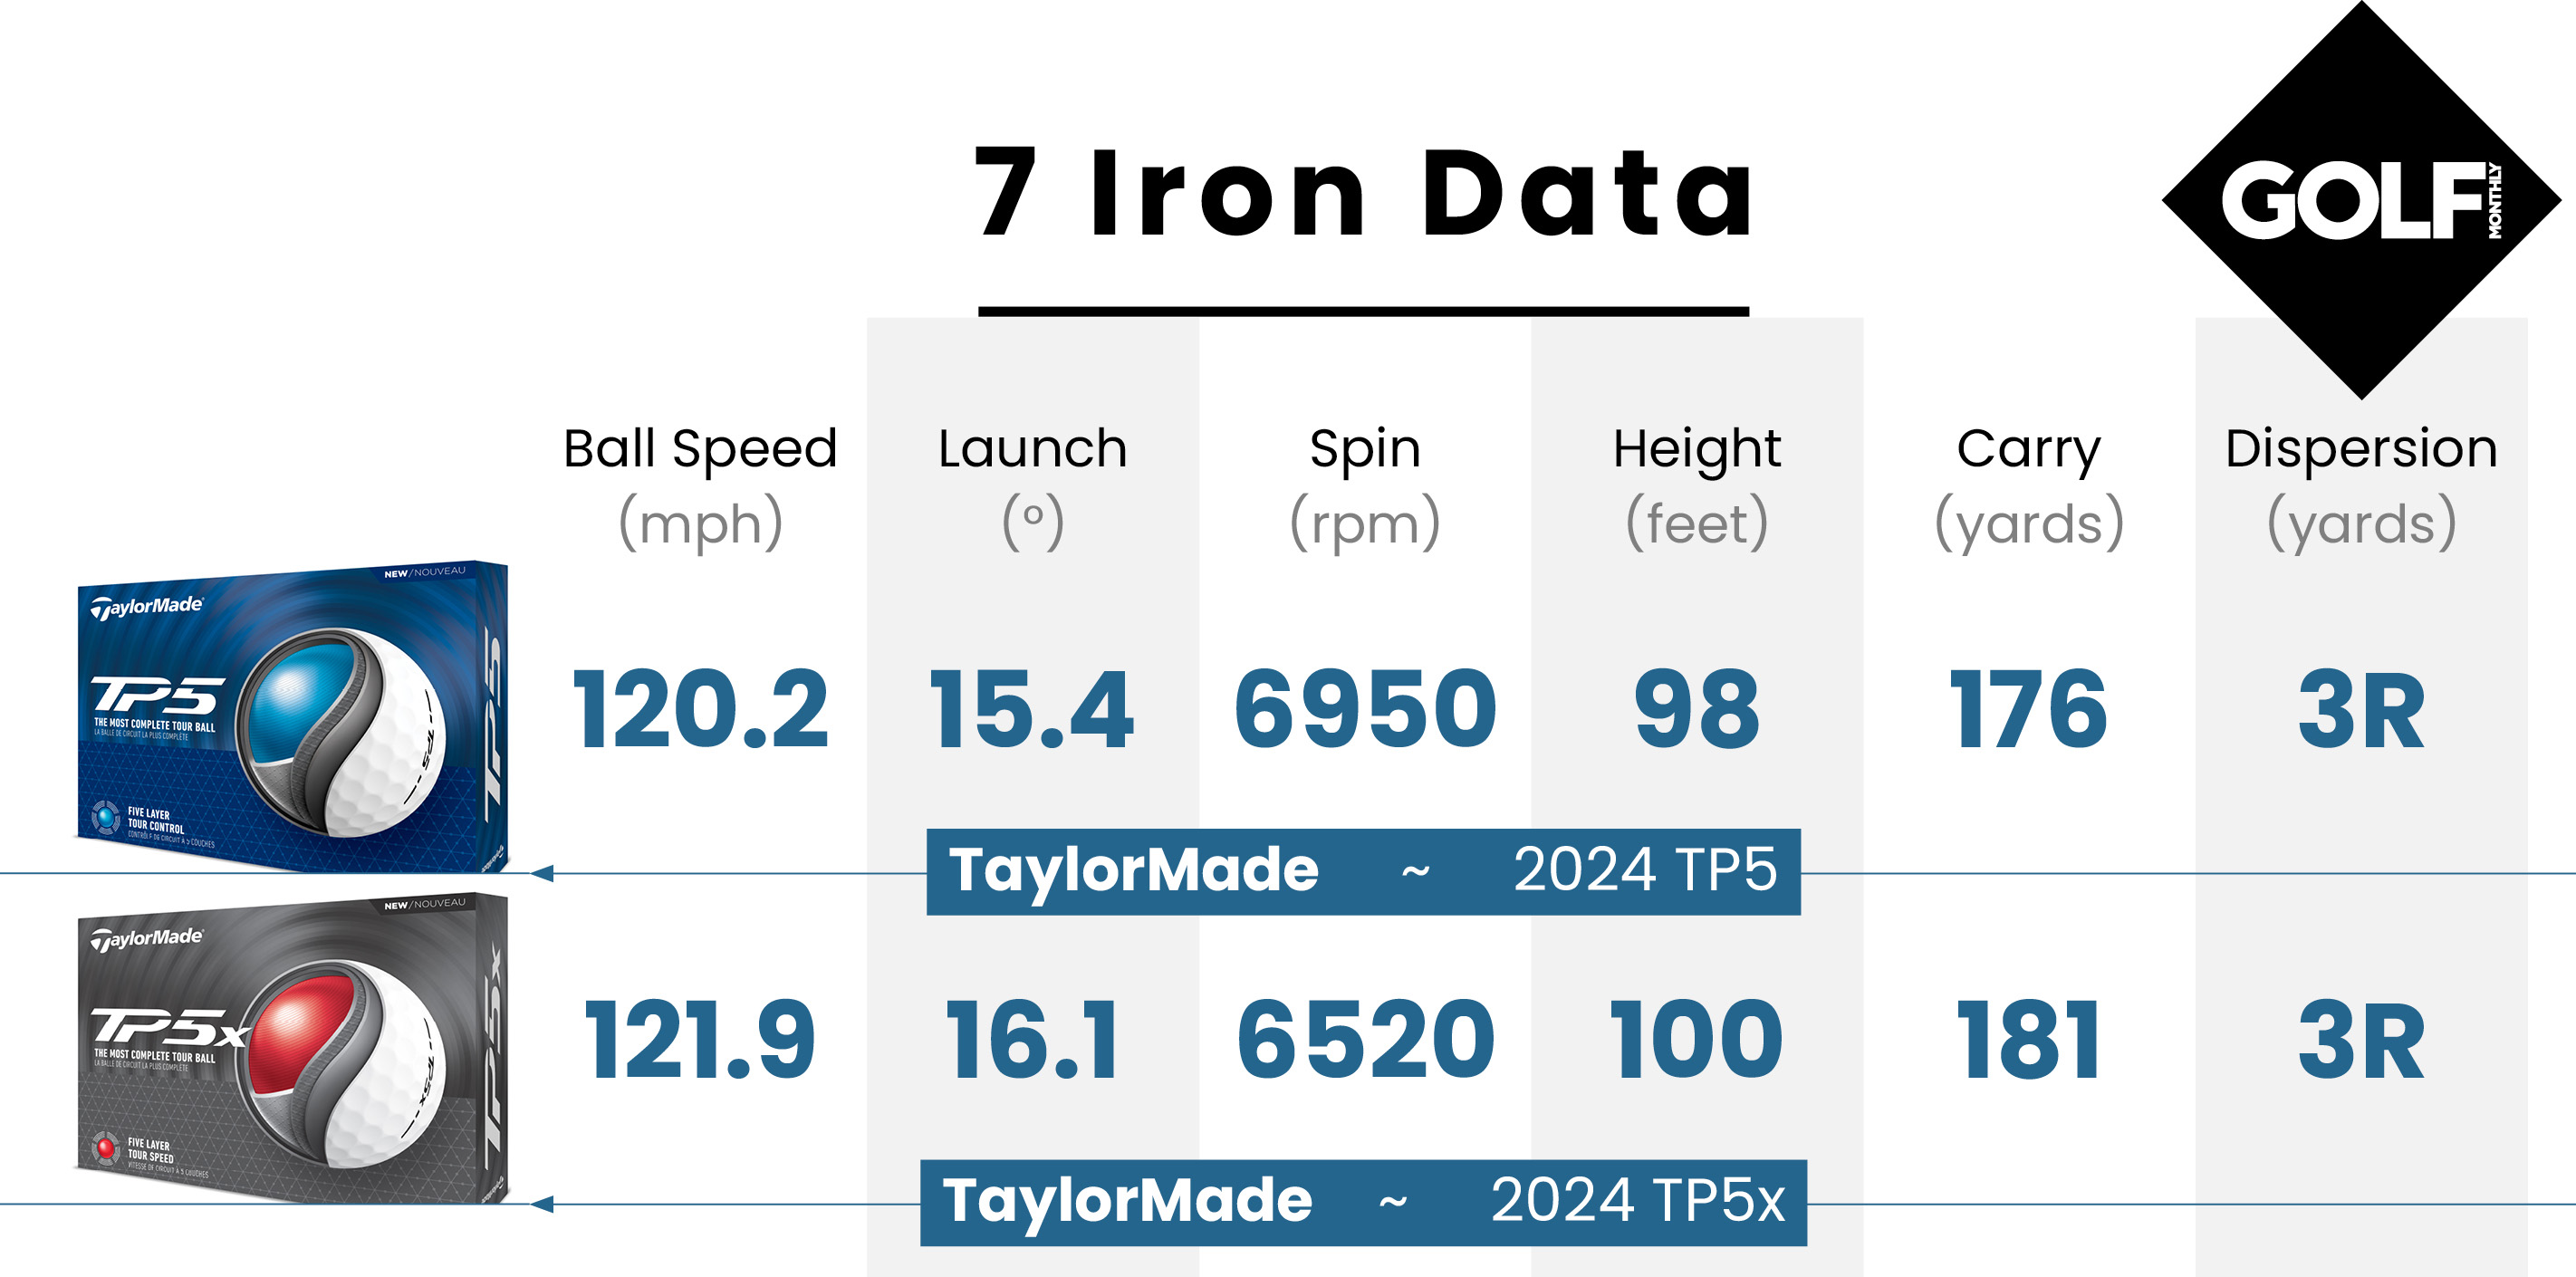 7 iron data from the TaylorMade 2024 TP5x Golf Ball